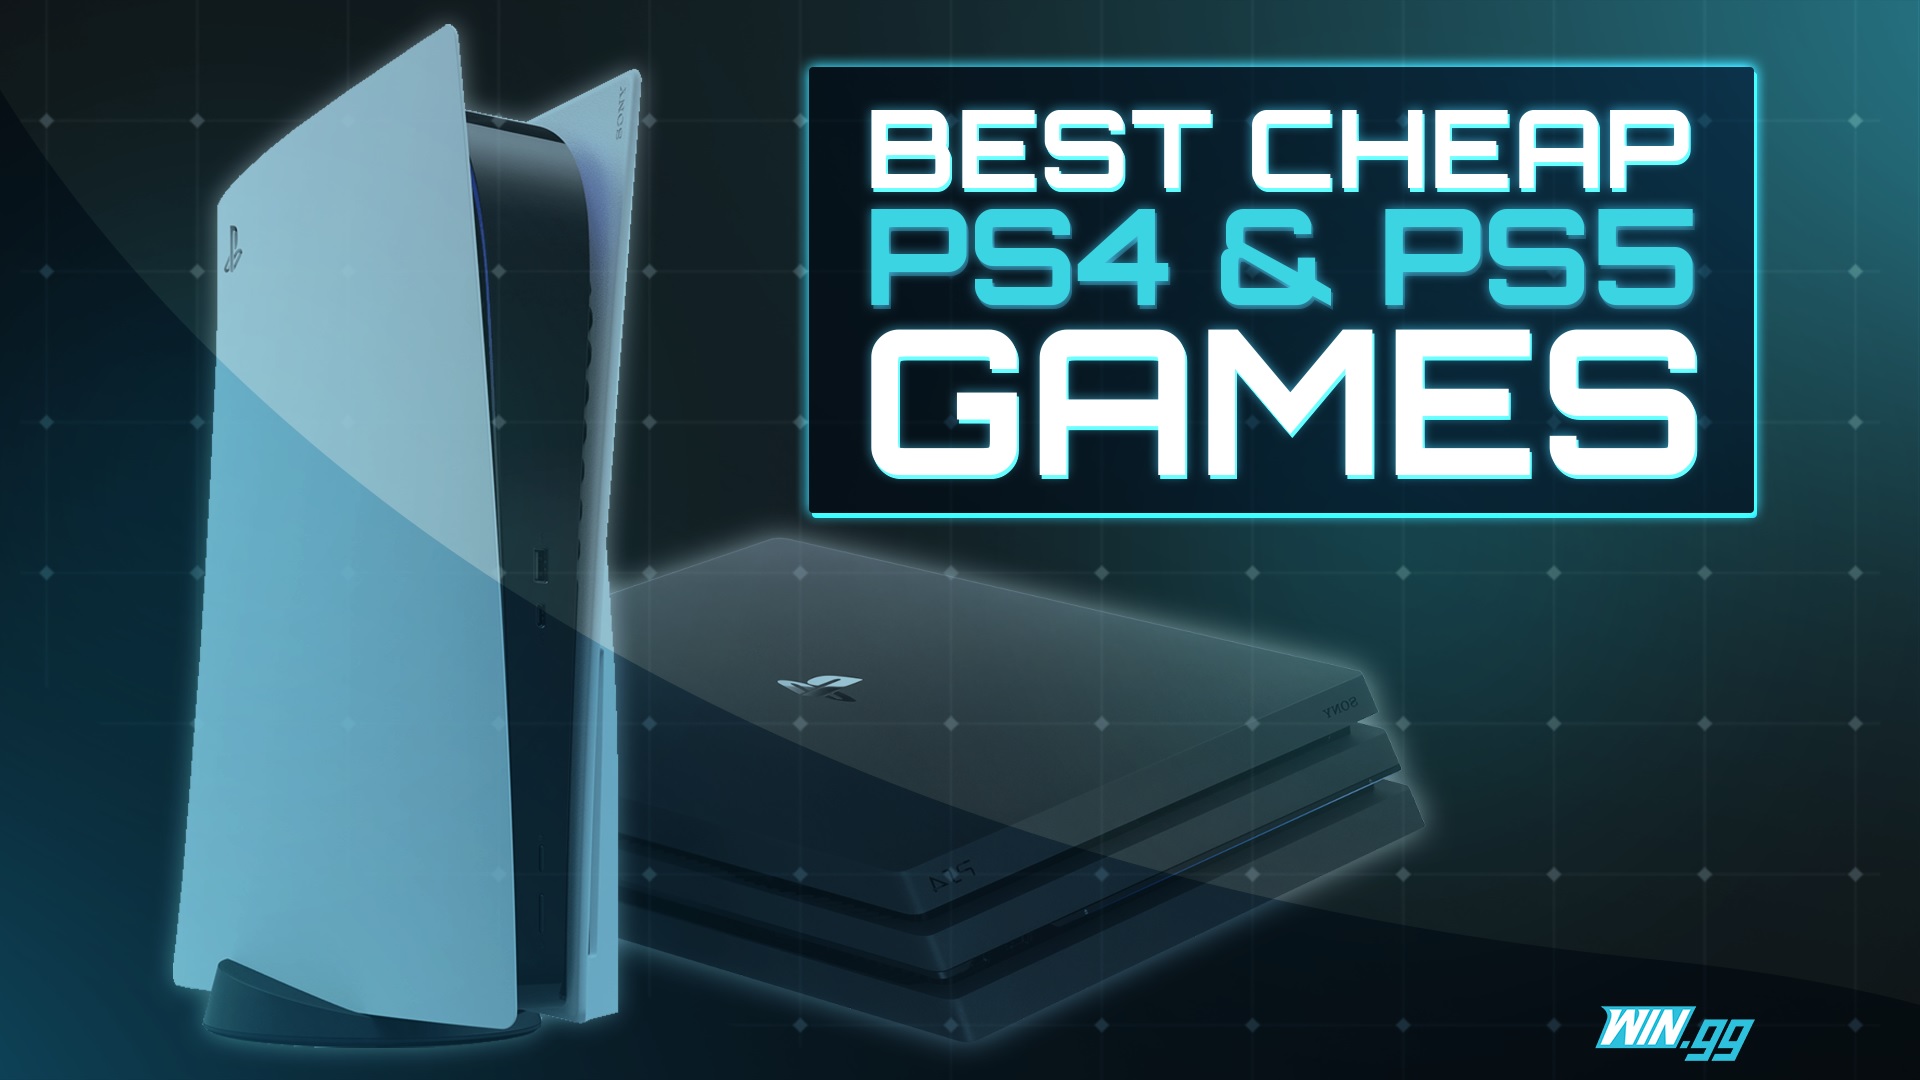 Ringlet grim krise These are the 10 best cheap games for PS4 and PS5 - WIN.gg